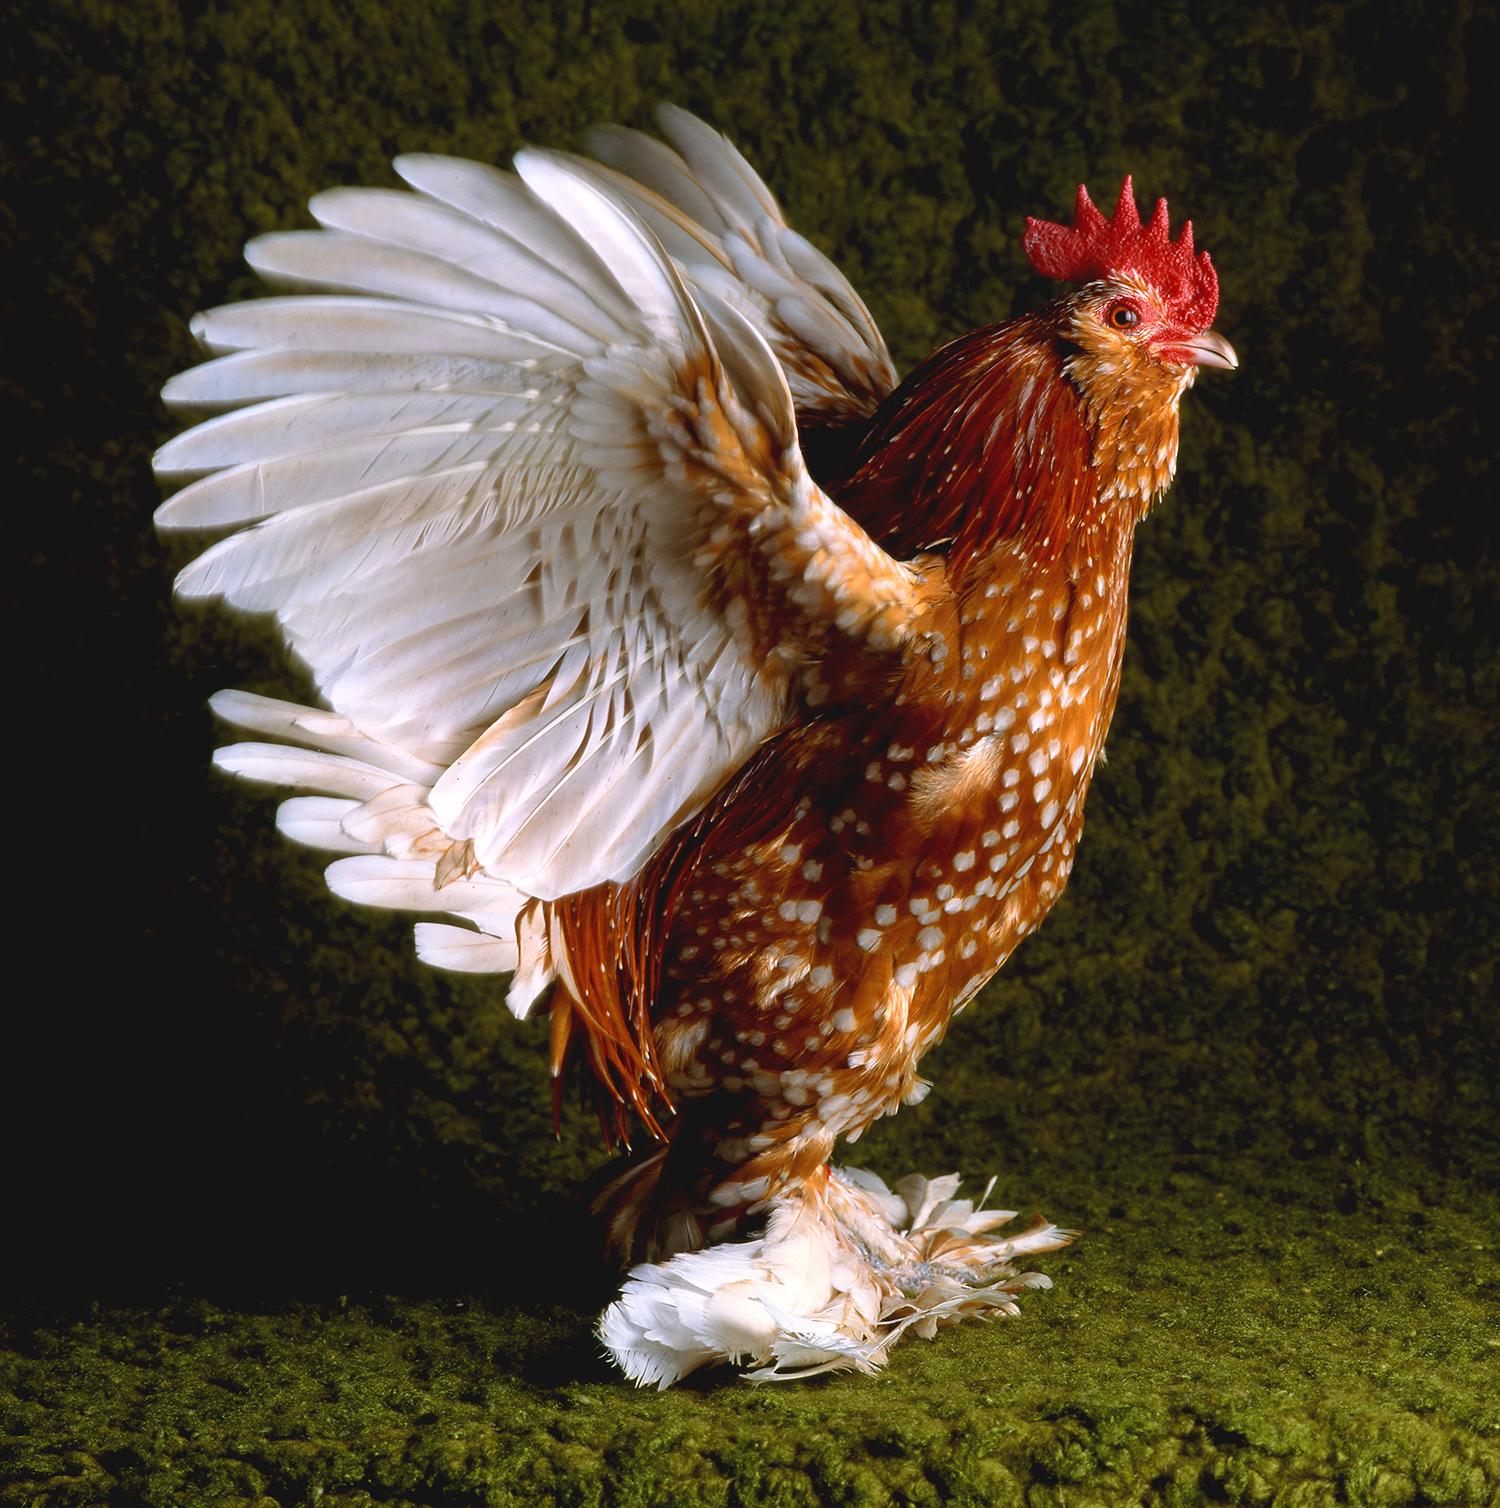 Portrait of a chicken, brown with white spots, with its wings extended.